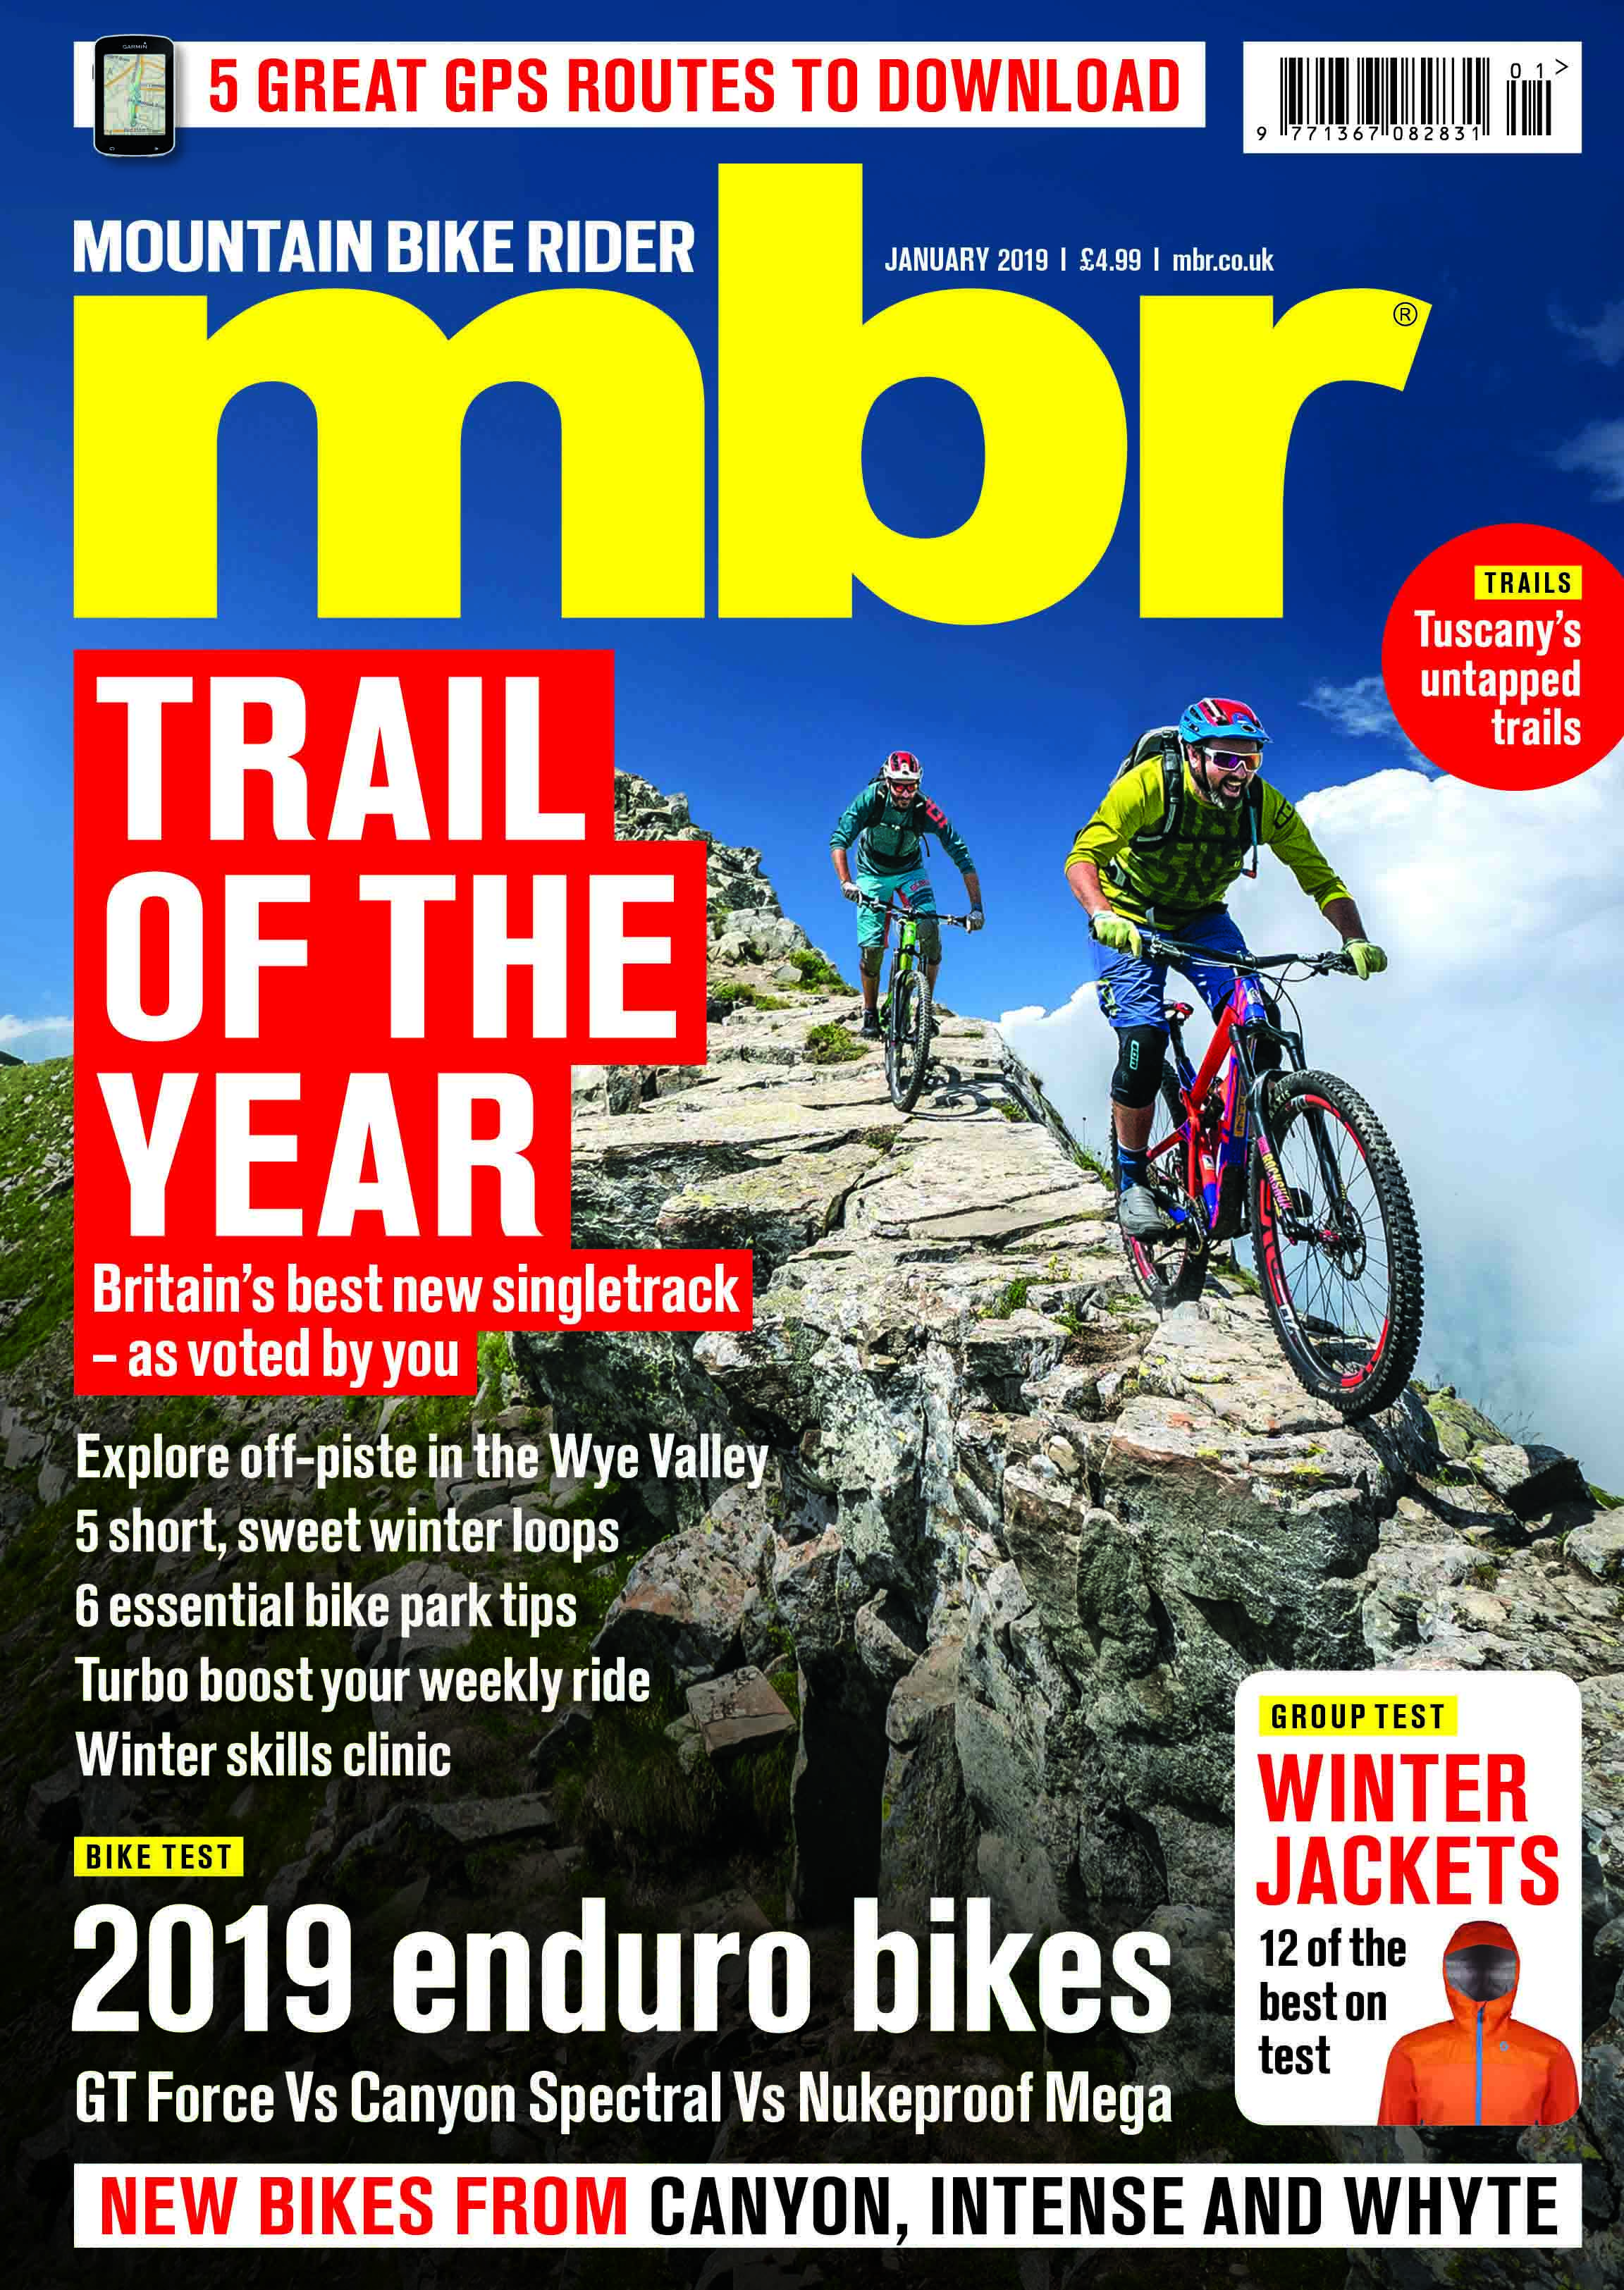 MBR MAGAZINE COVER SHOT AND STORY